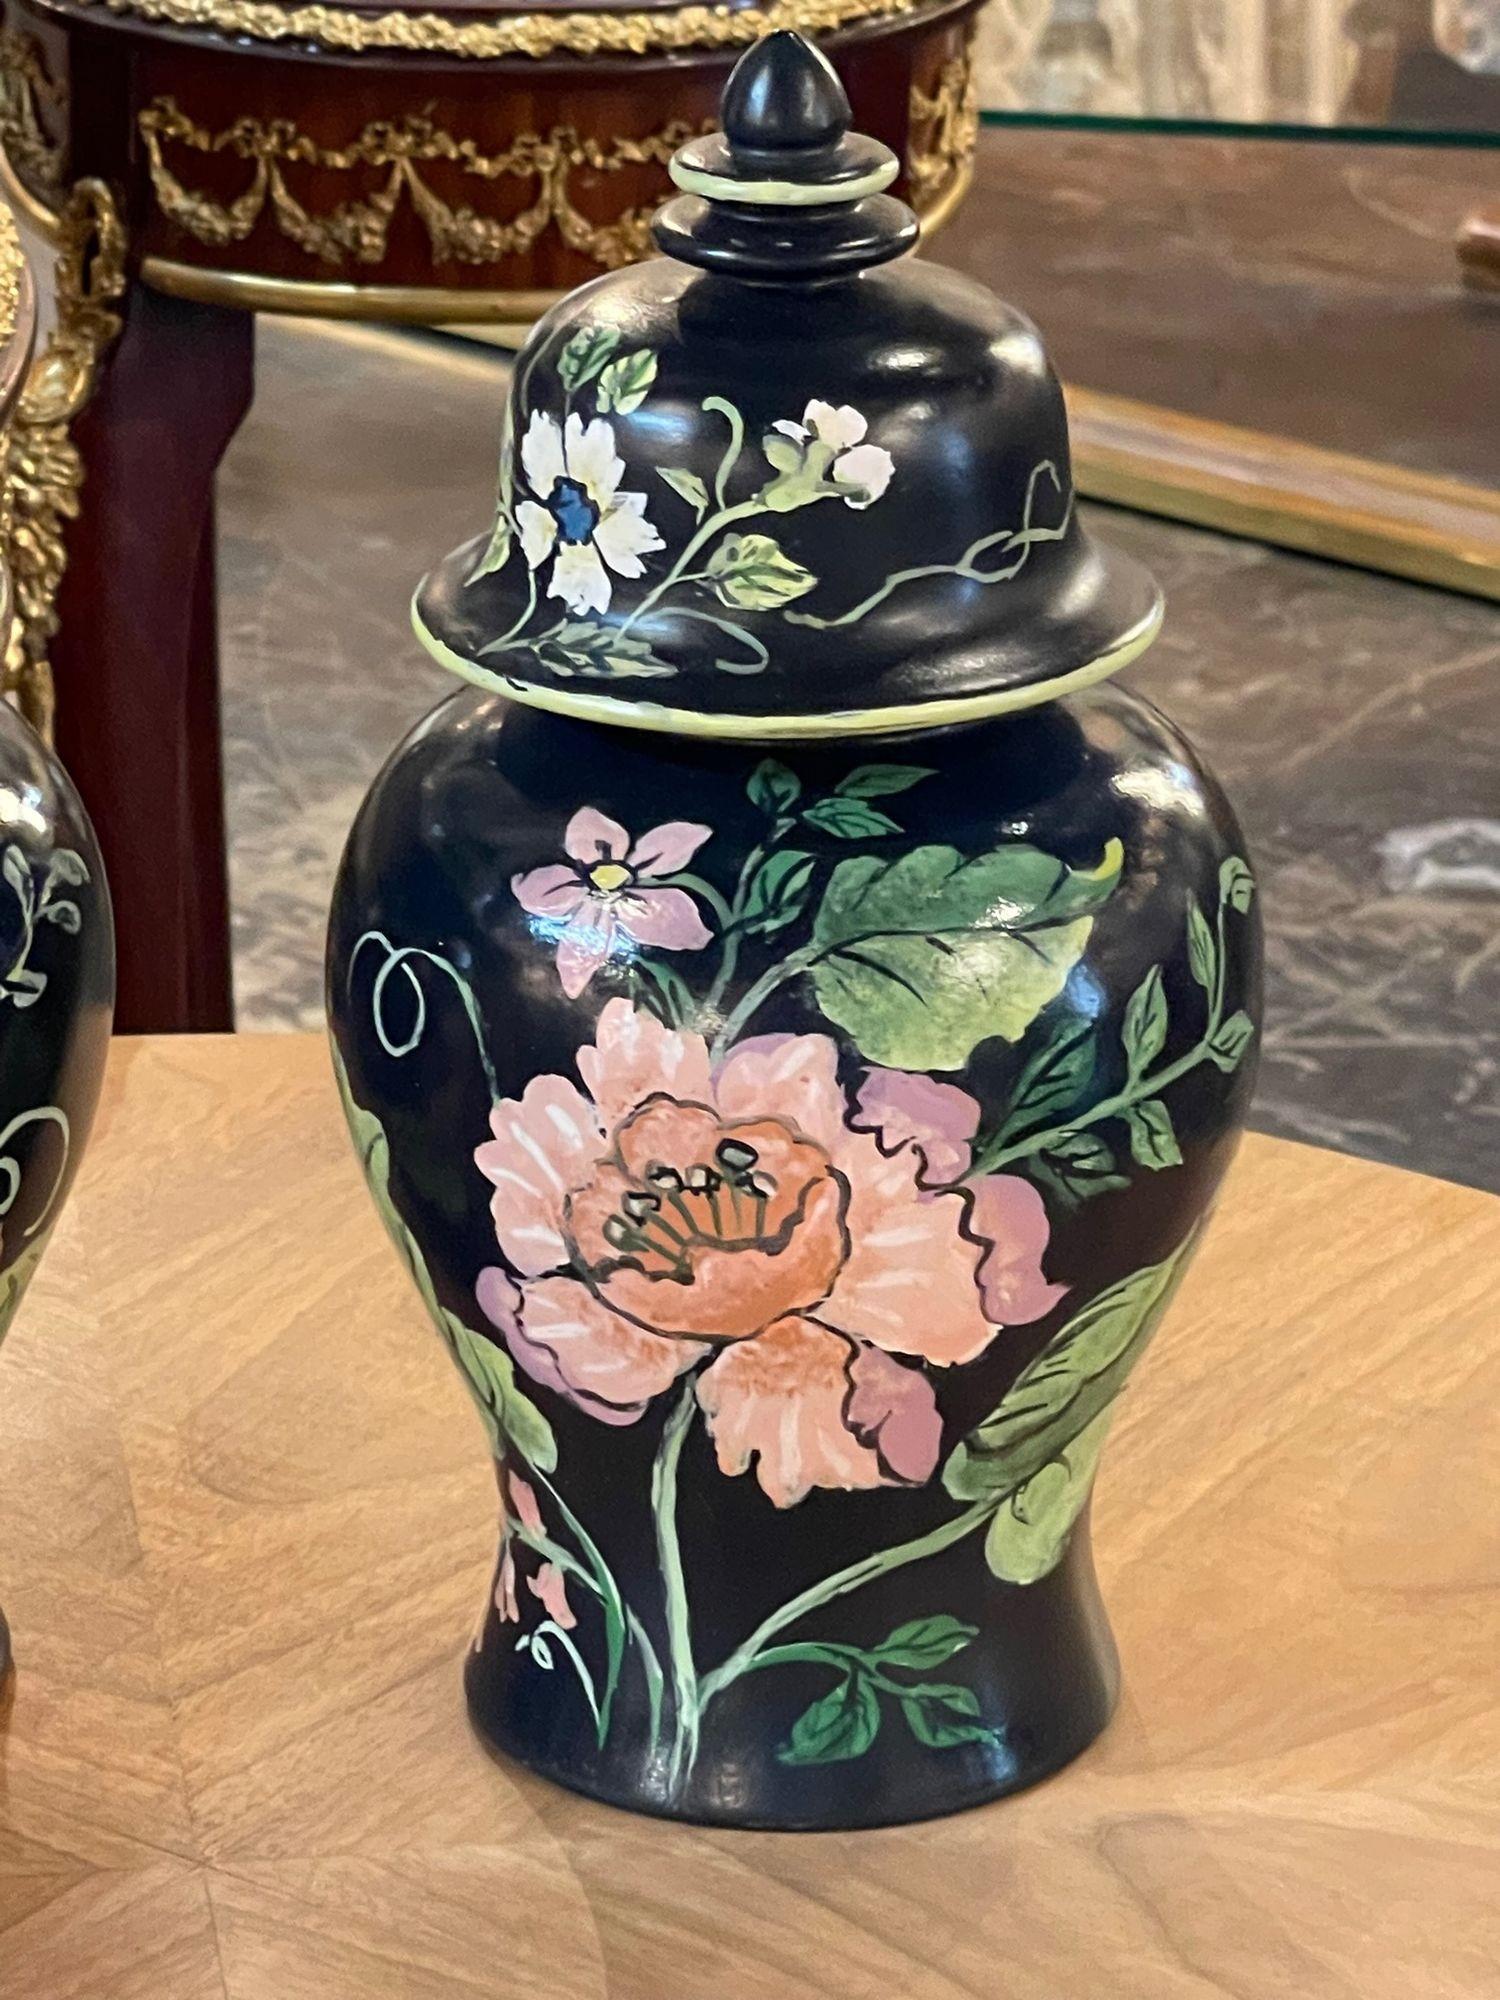 Beautiful pair of Italian porcelain vases with a decorative floral design. Makes a lovely accessory!